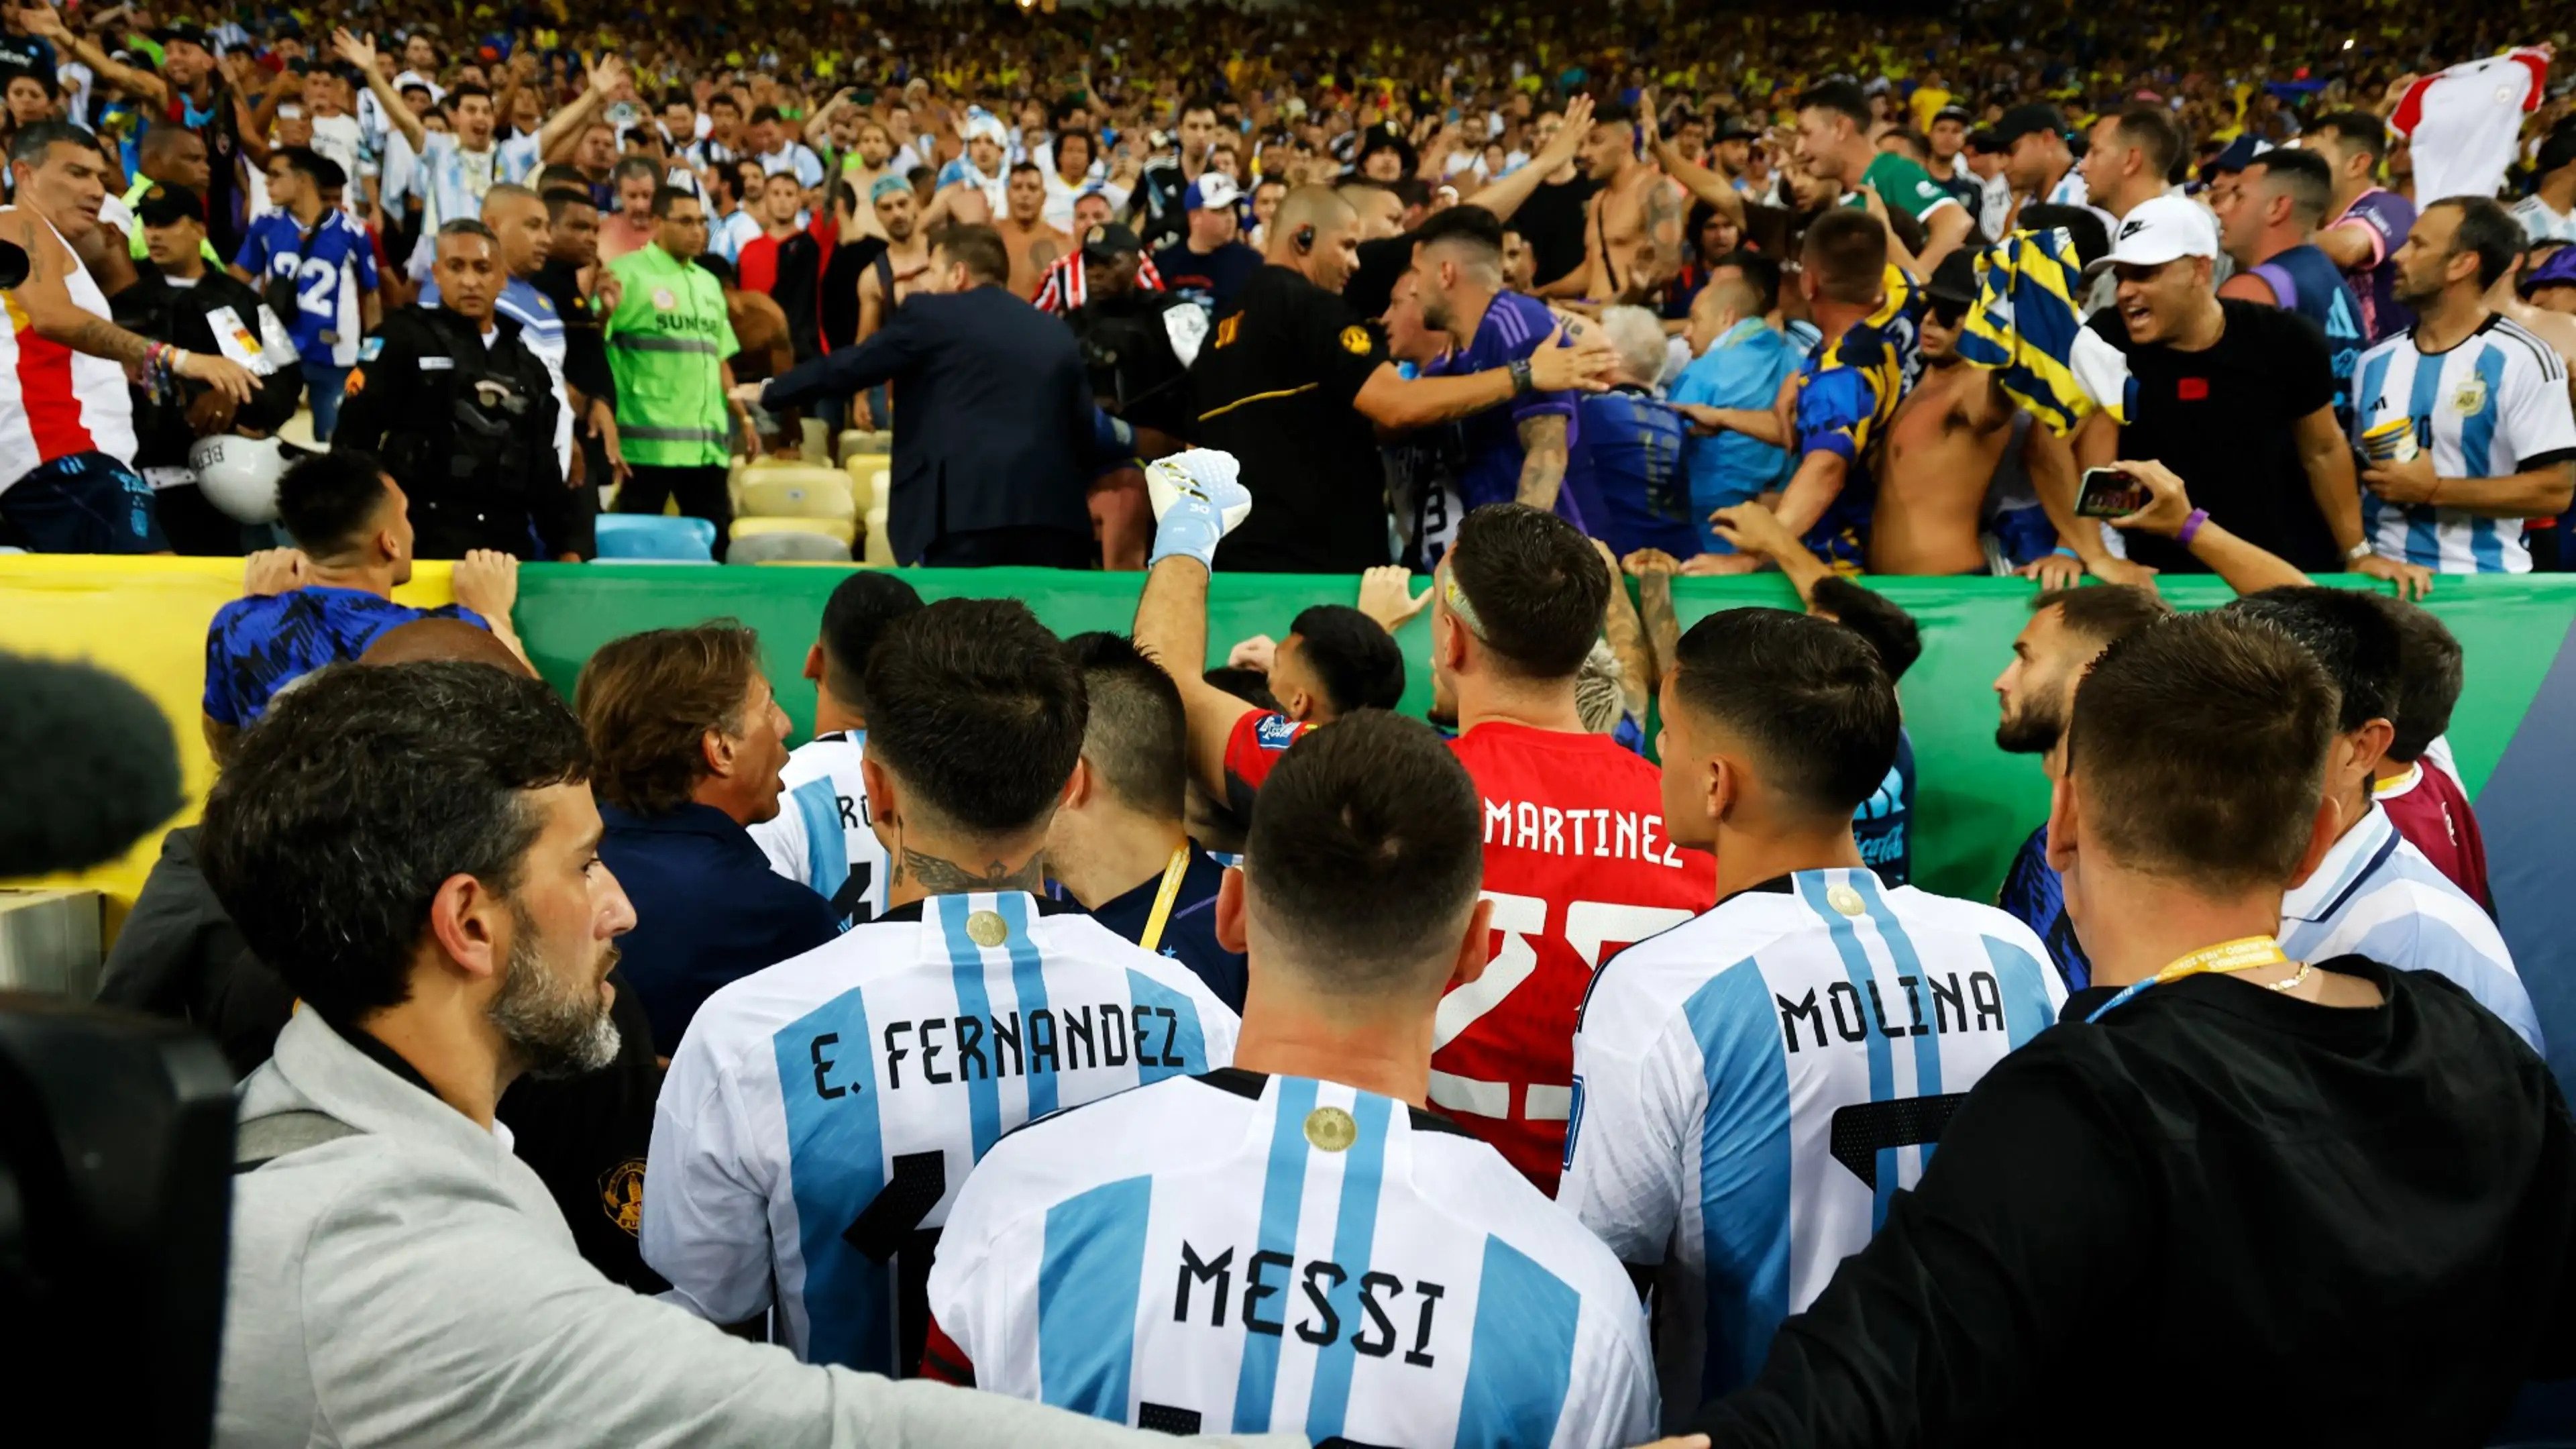 The Argentina players speaking to the fans